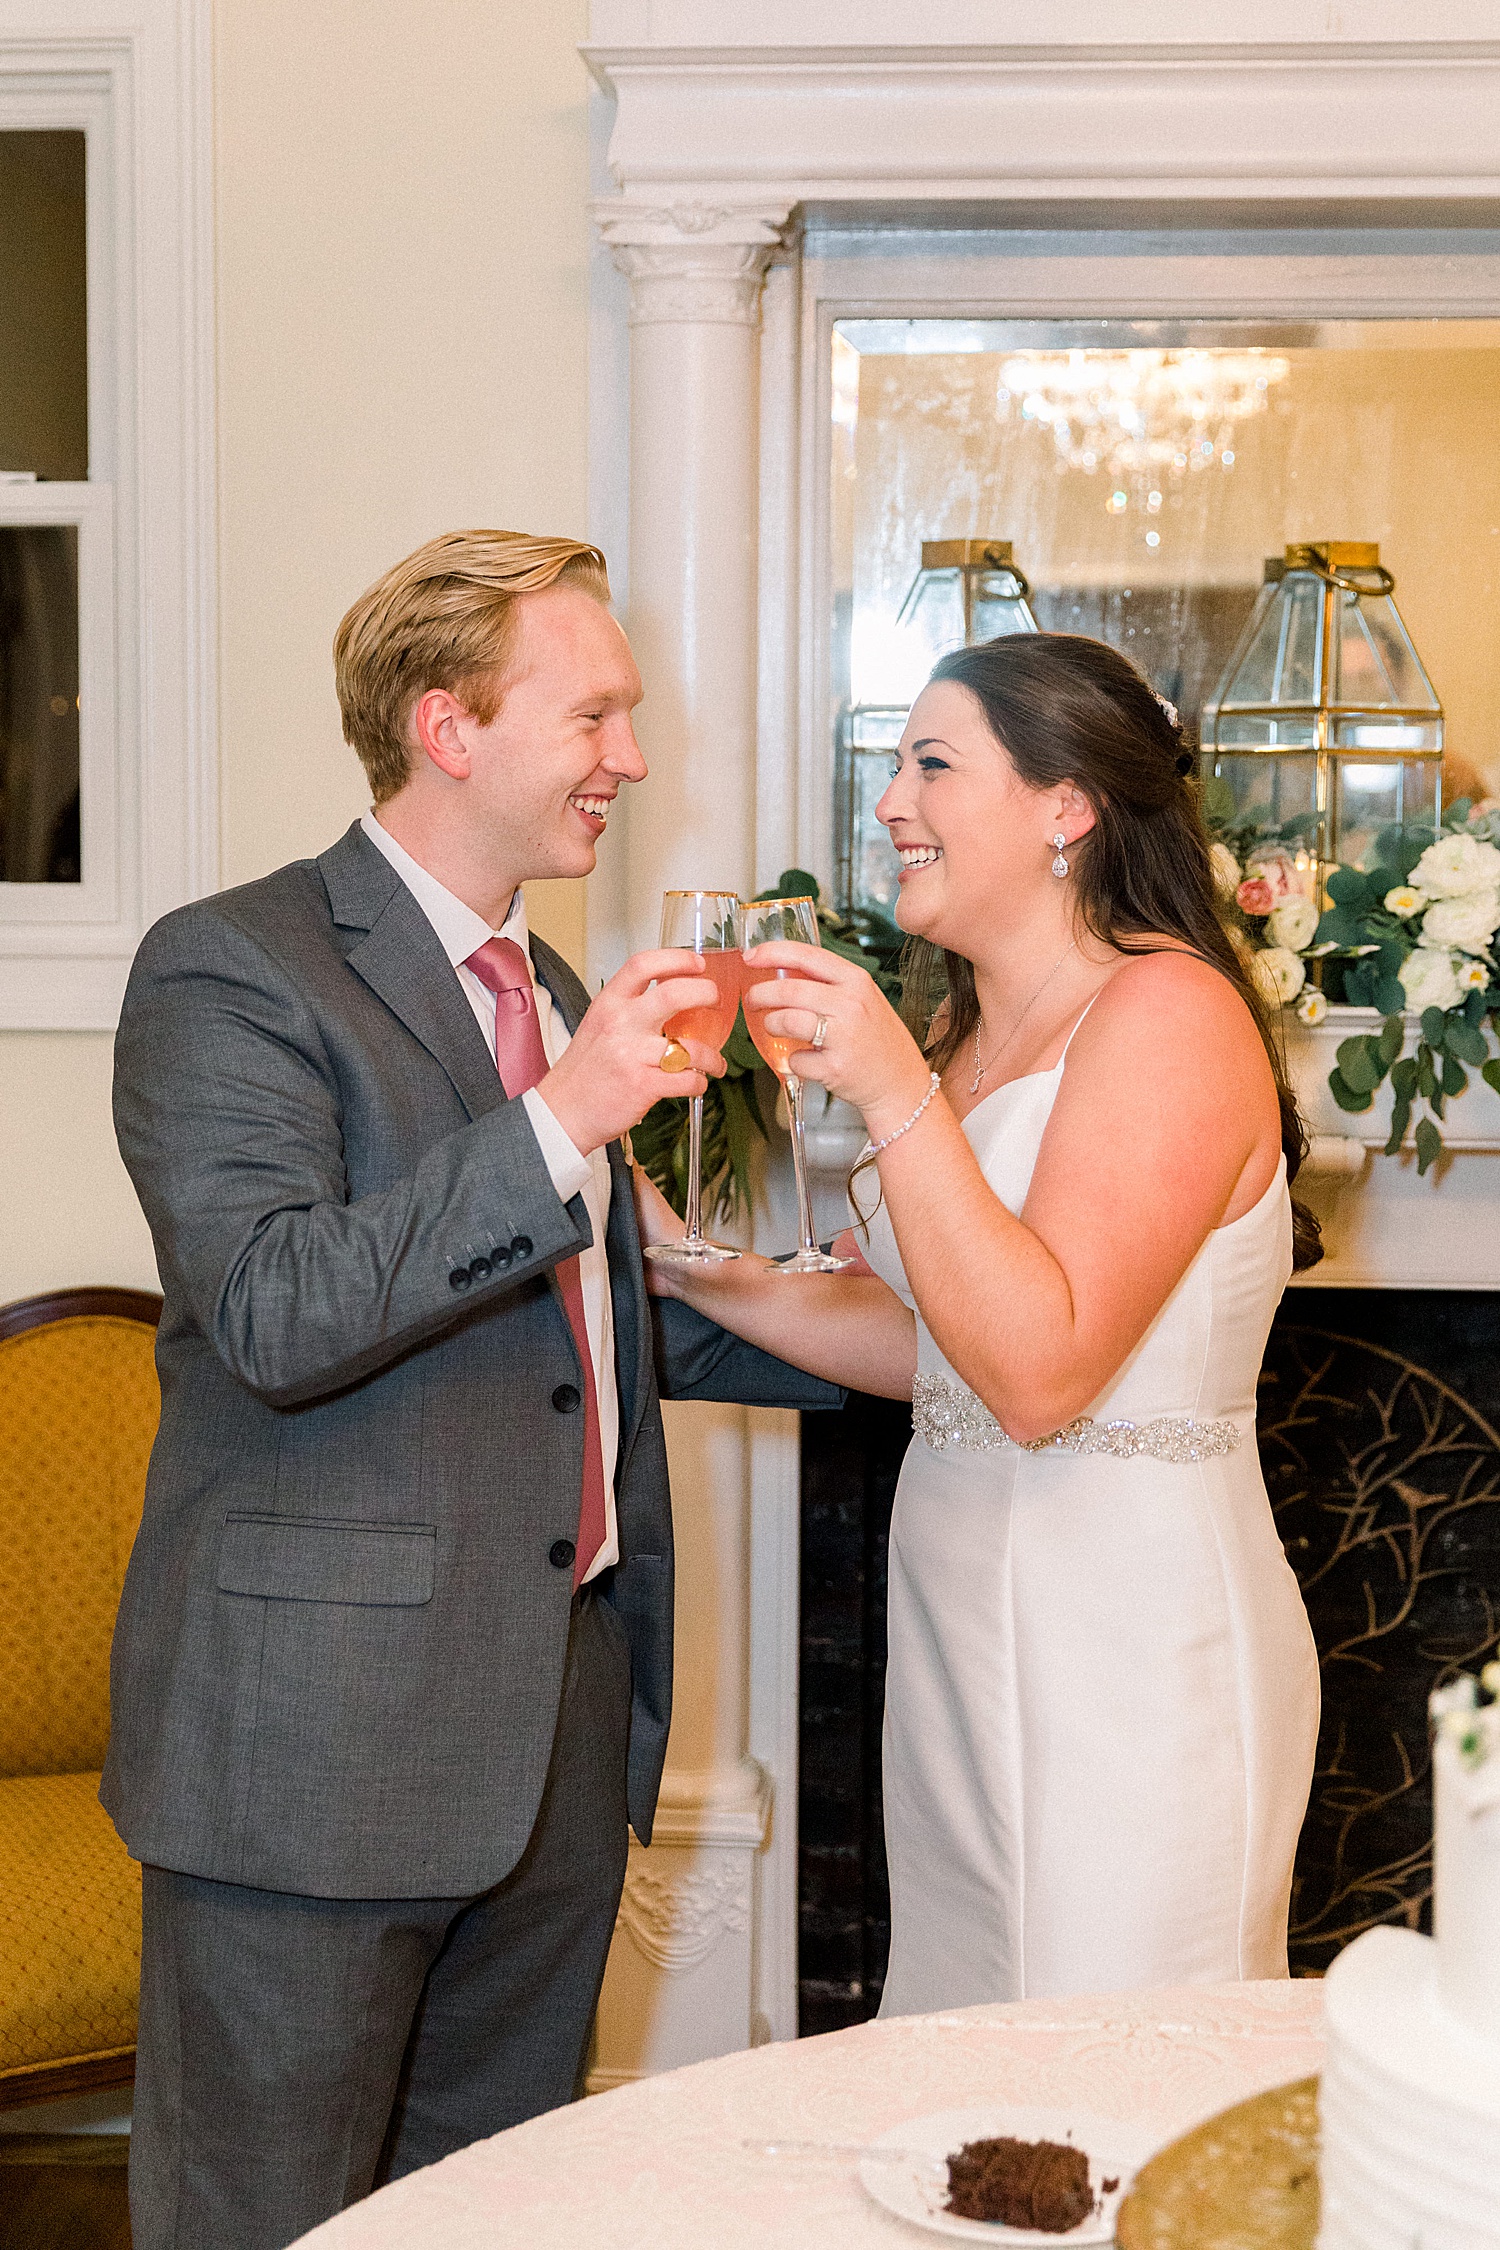 newlyweds toast to their marriage